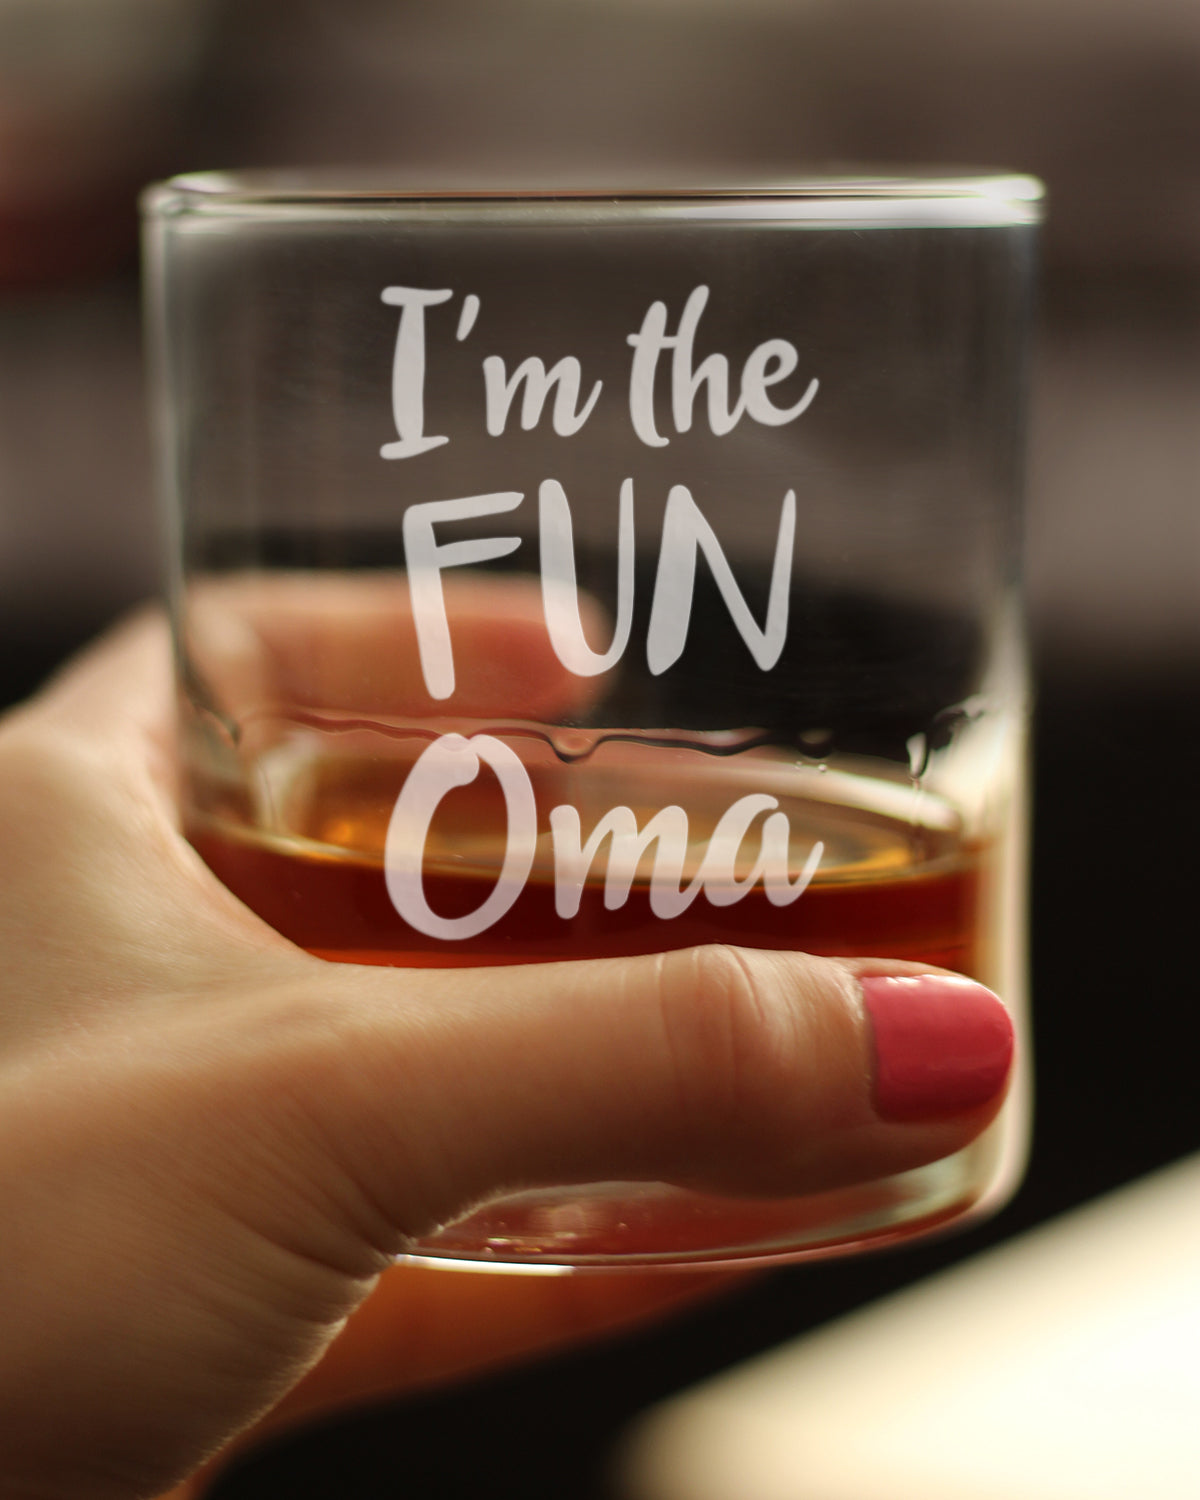 Fun Oma Whiskey Rocks Glass - Cute Grandparents Themed Gifts or Party Décor for Women - 10.25 Oz